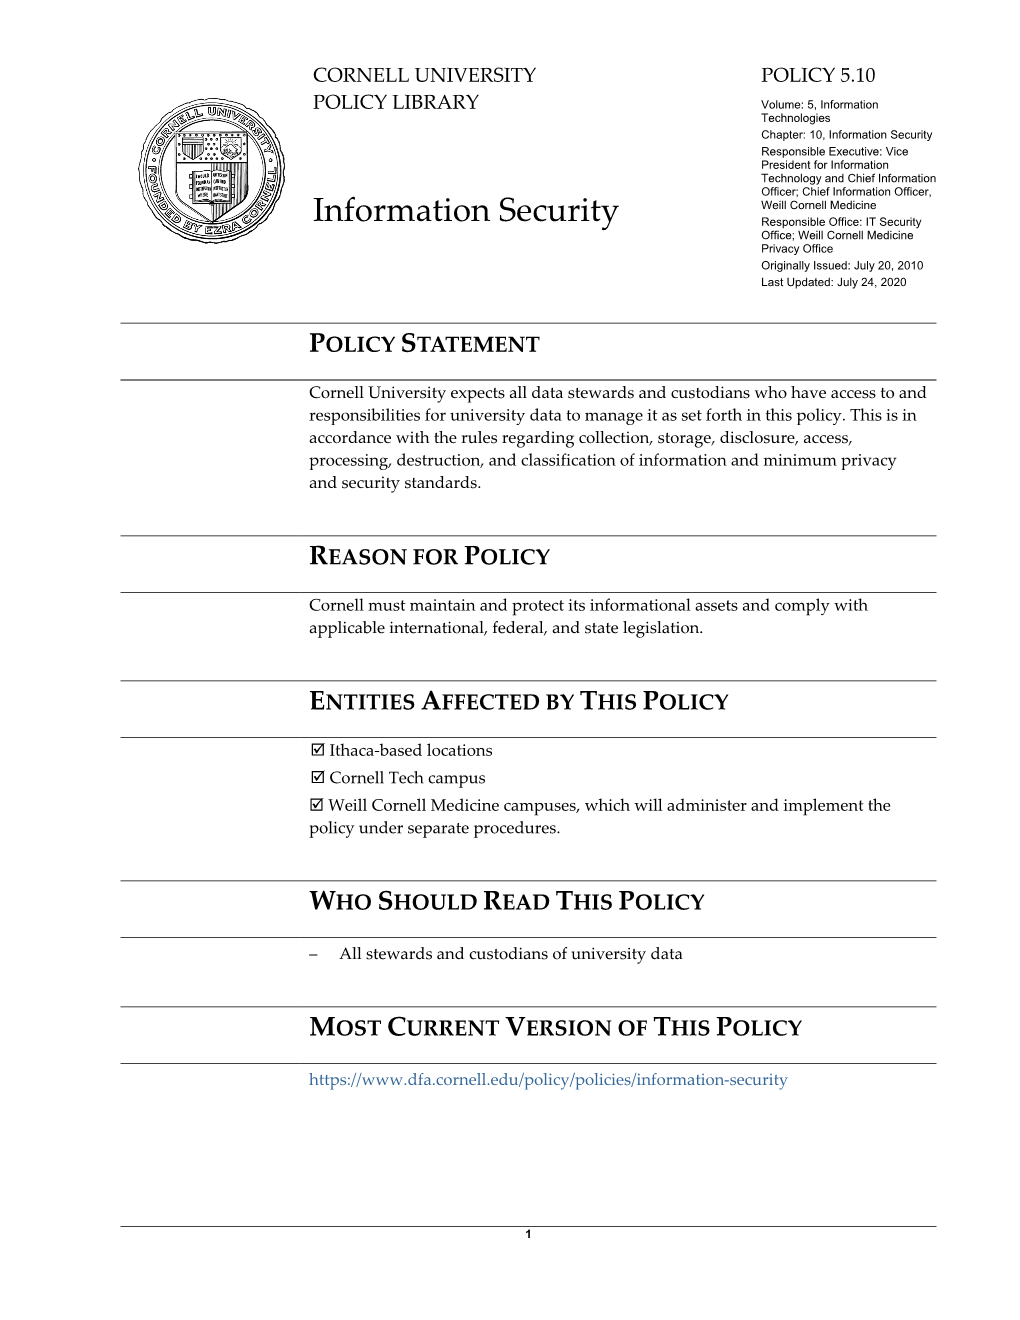 University Policy 5.10, Information Security